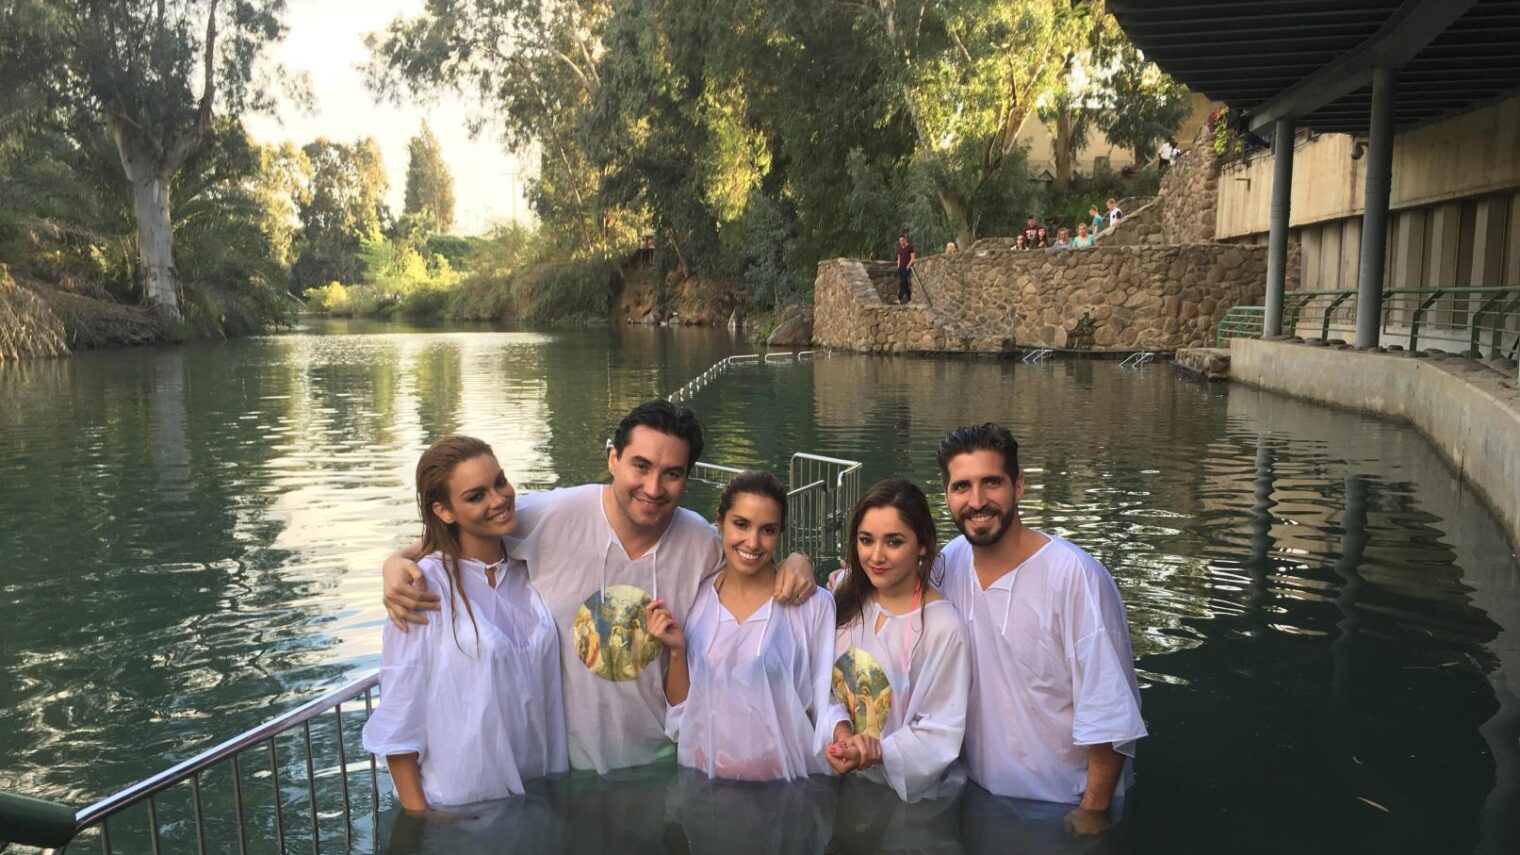 Being baptized in the Jordan River are, from left, Zuleyka Rivera, Luis Alfonso Borrego, Andrea Escalona, Sherlyn González, and Carlitos Perez-Ruiz (Luis Fonsi’s manager). Photo courtesy of America's Voices in Israel